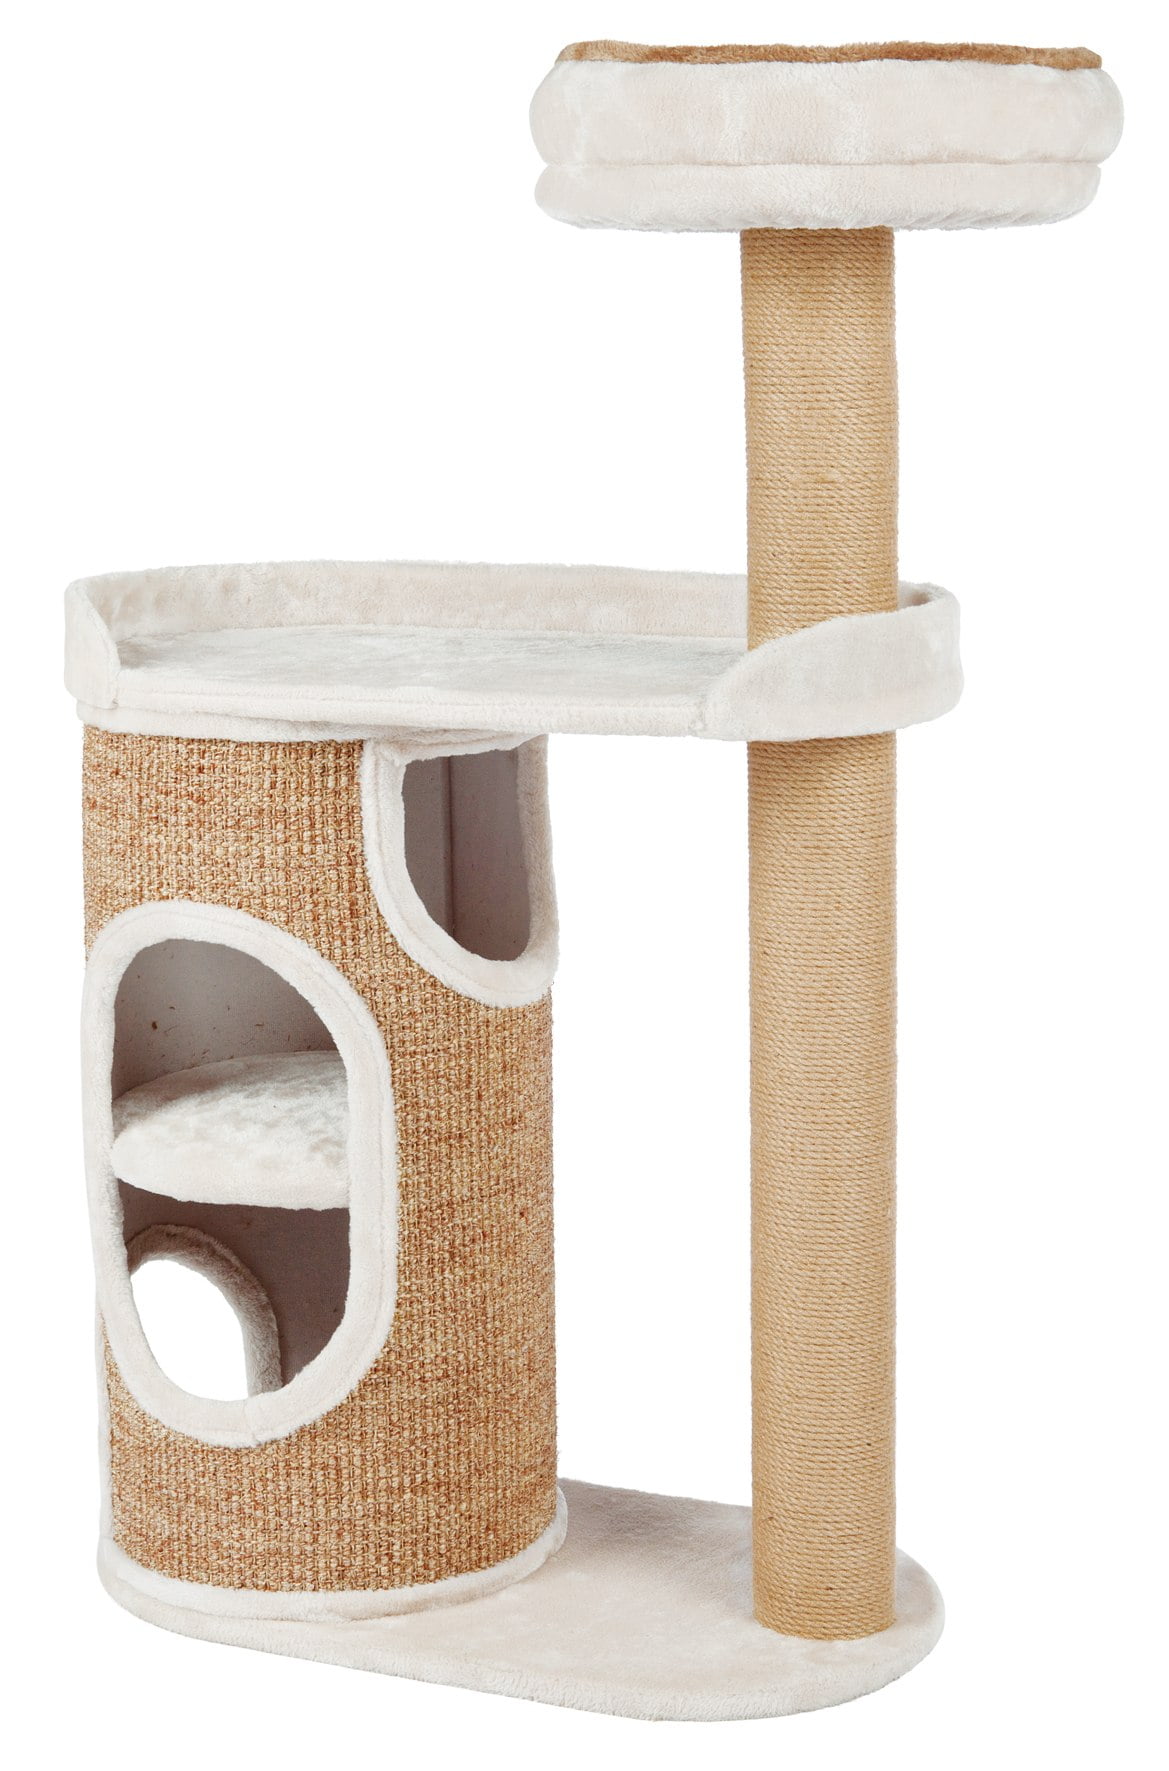 Cat Tower Tree & Dog House Compatible with Lego – Purrfection Meow